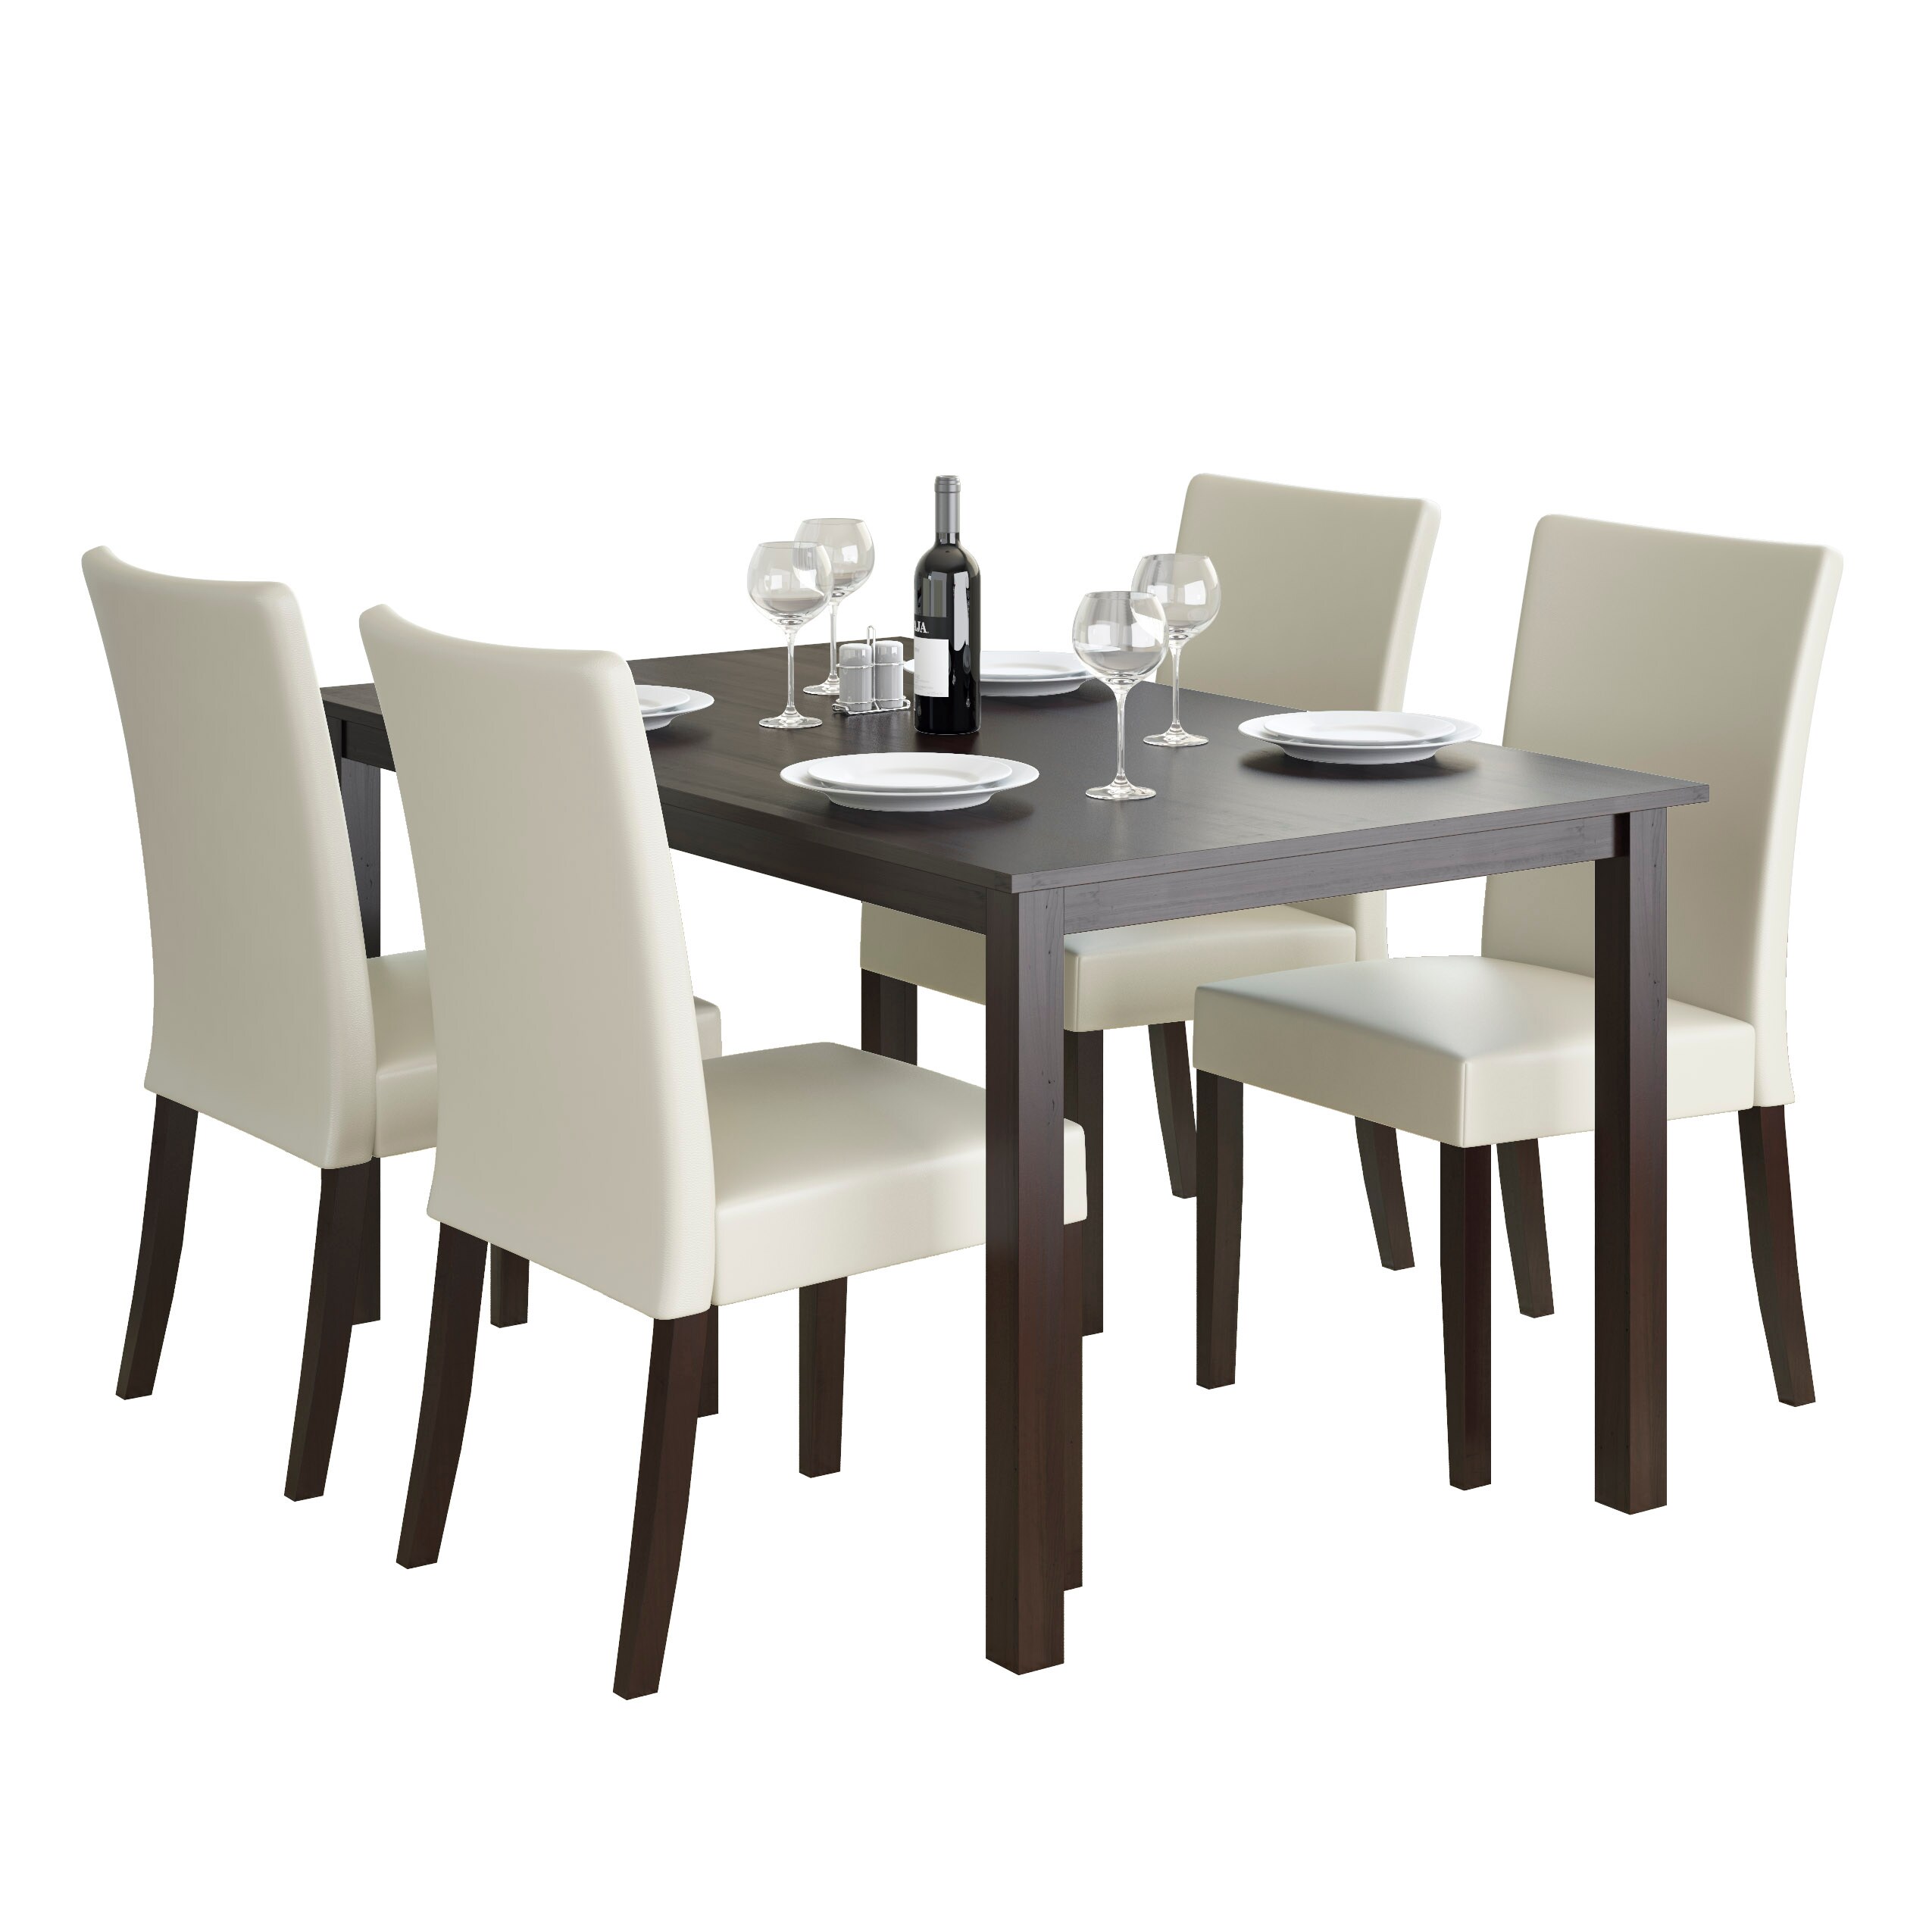 CorLiving Atwood Dining chairs Cappuccino 